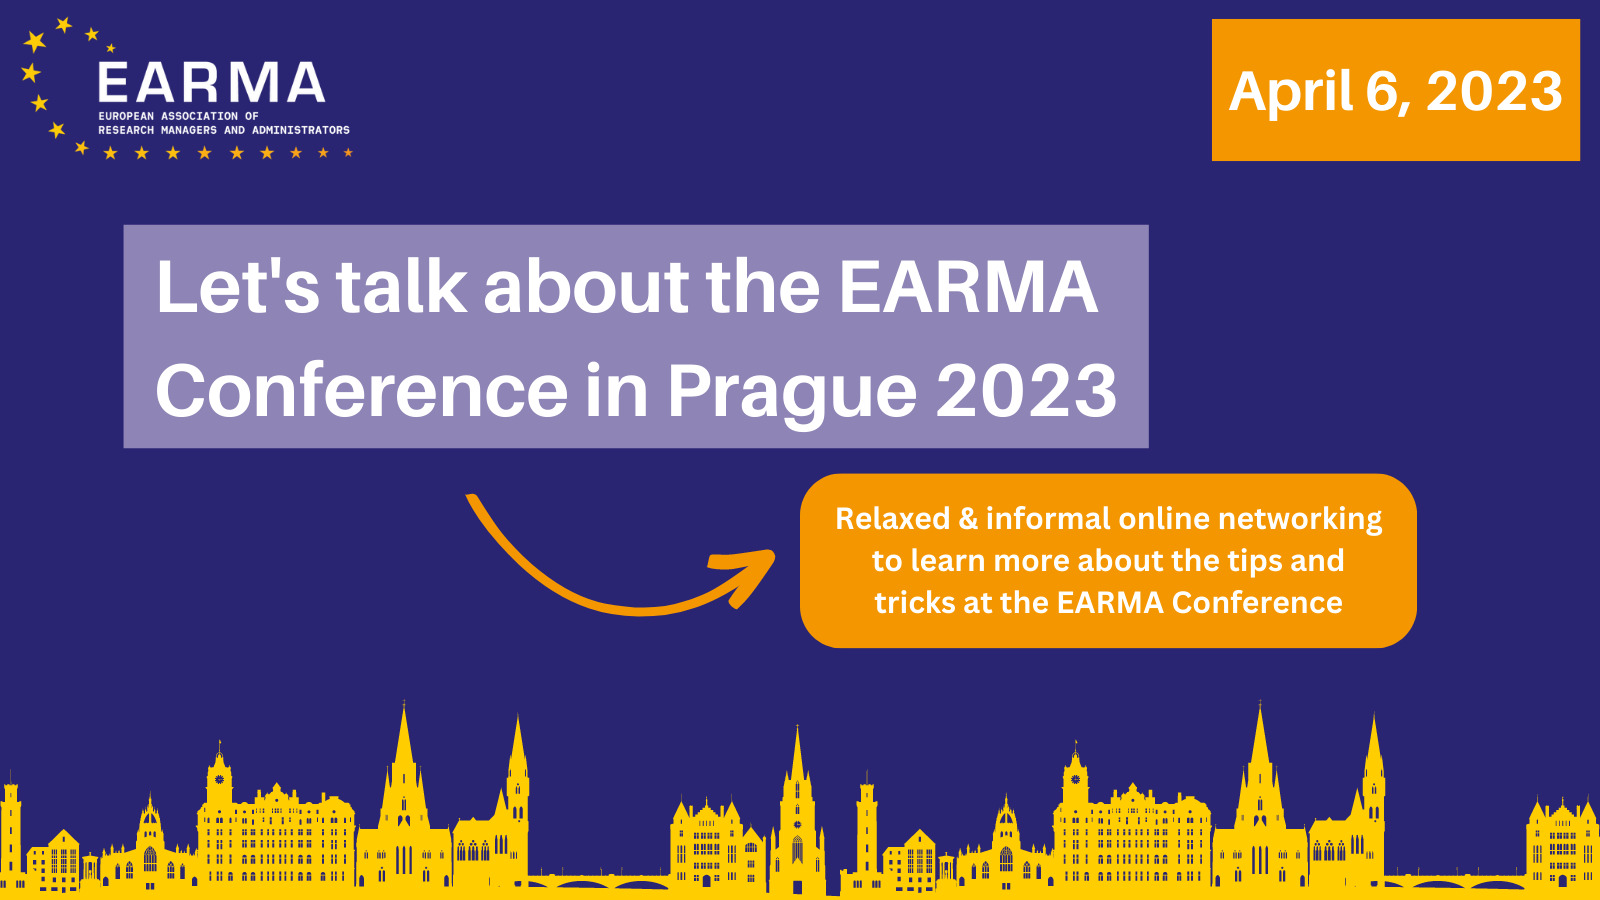 Let's talk about the Conference in Prague 2023